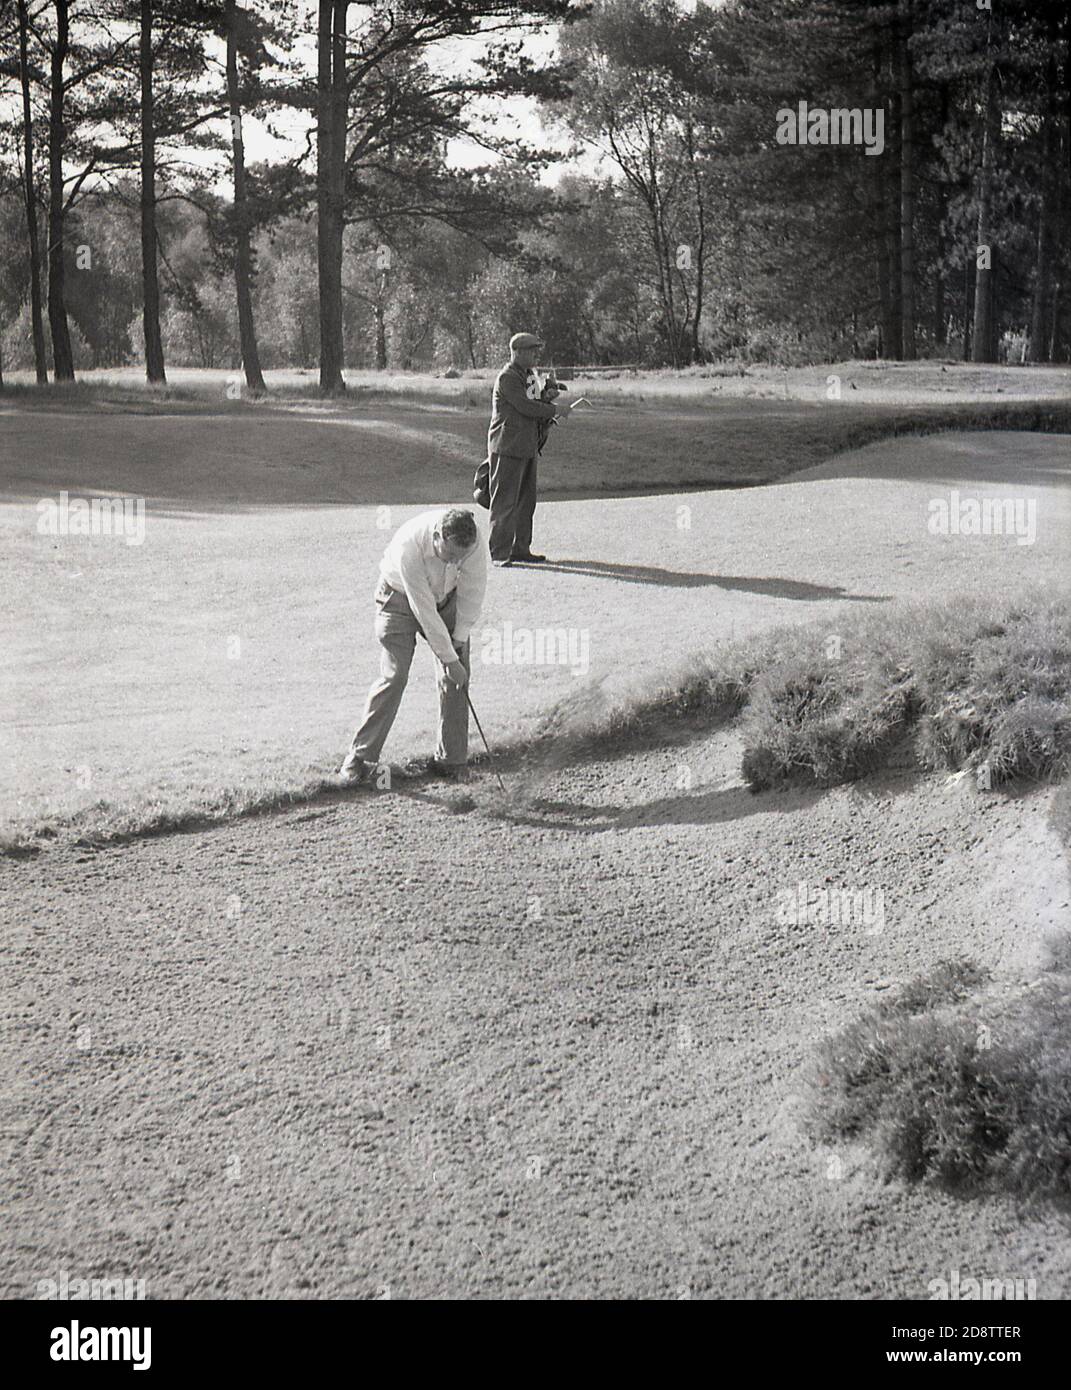 1960s, historical, a male golfer playing out of a fairway or bunker, with caddy standing level with him, carrying his golf clubs, England, UK. Stock Photo